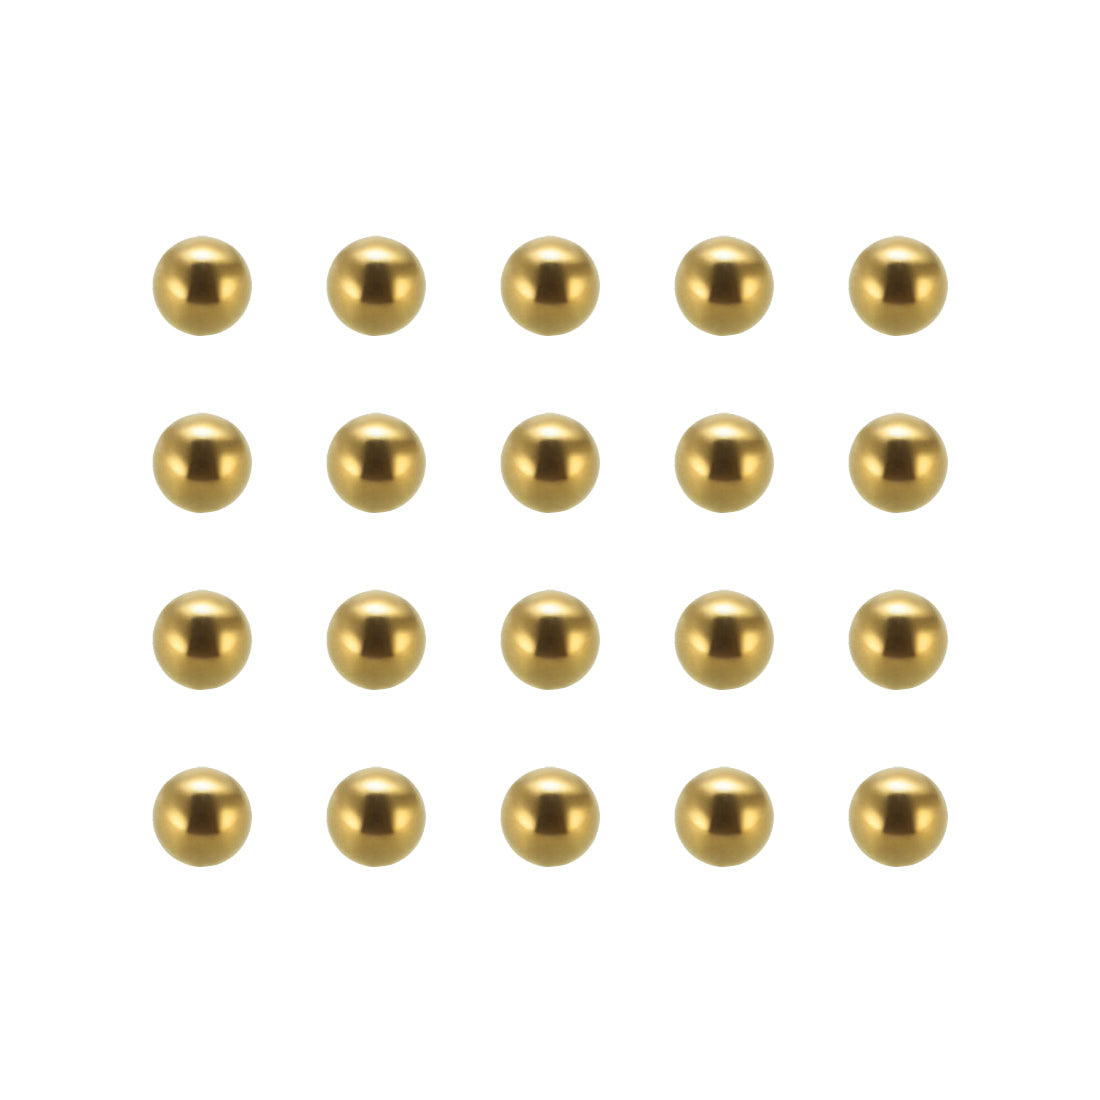 Uxcell Uxcell 4.5mm Precision Solid Brass Bearing Balls 50pcs